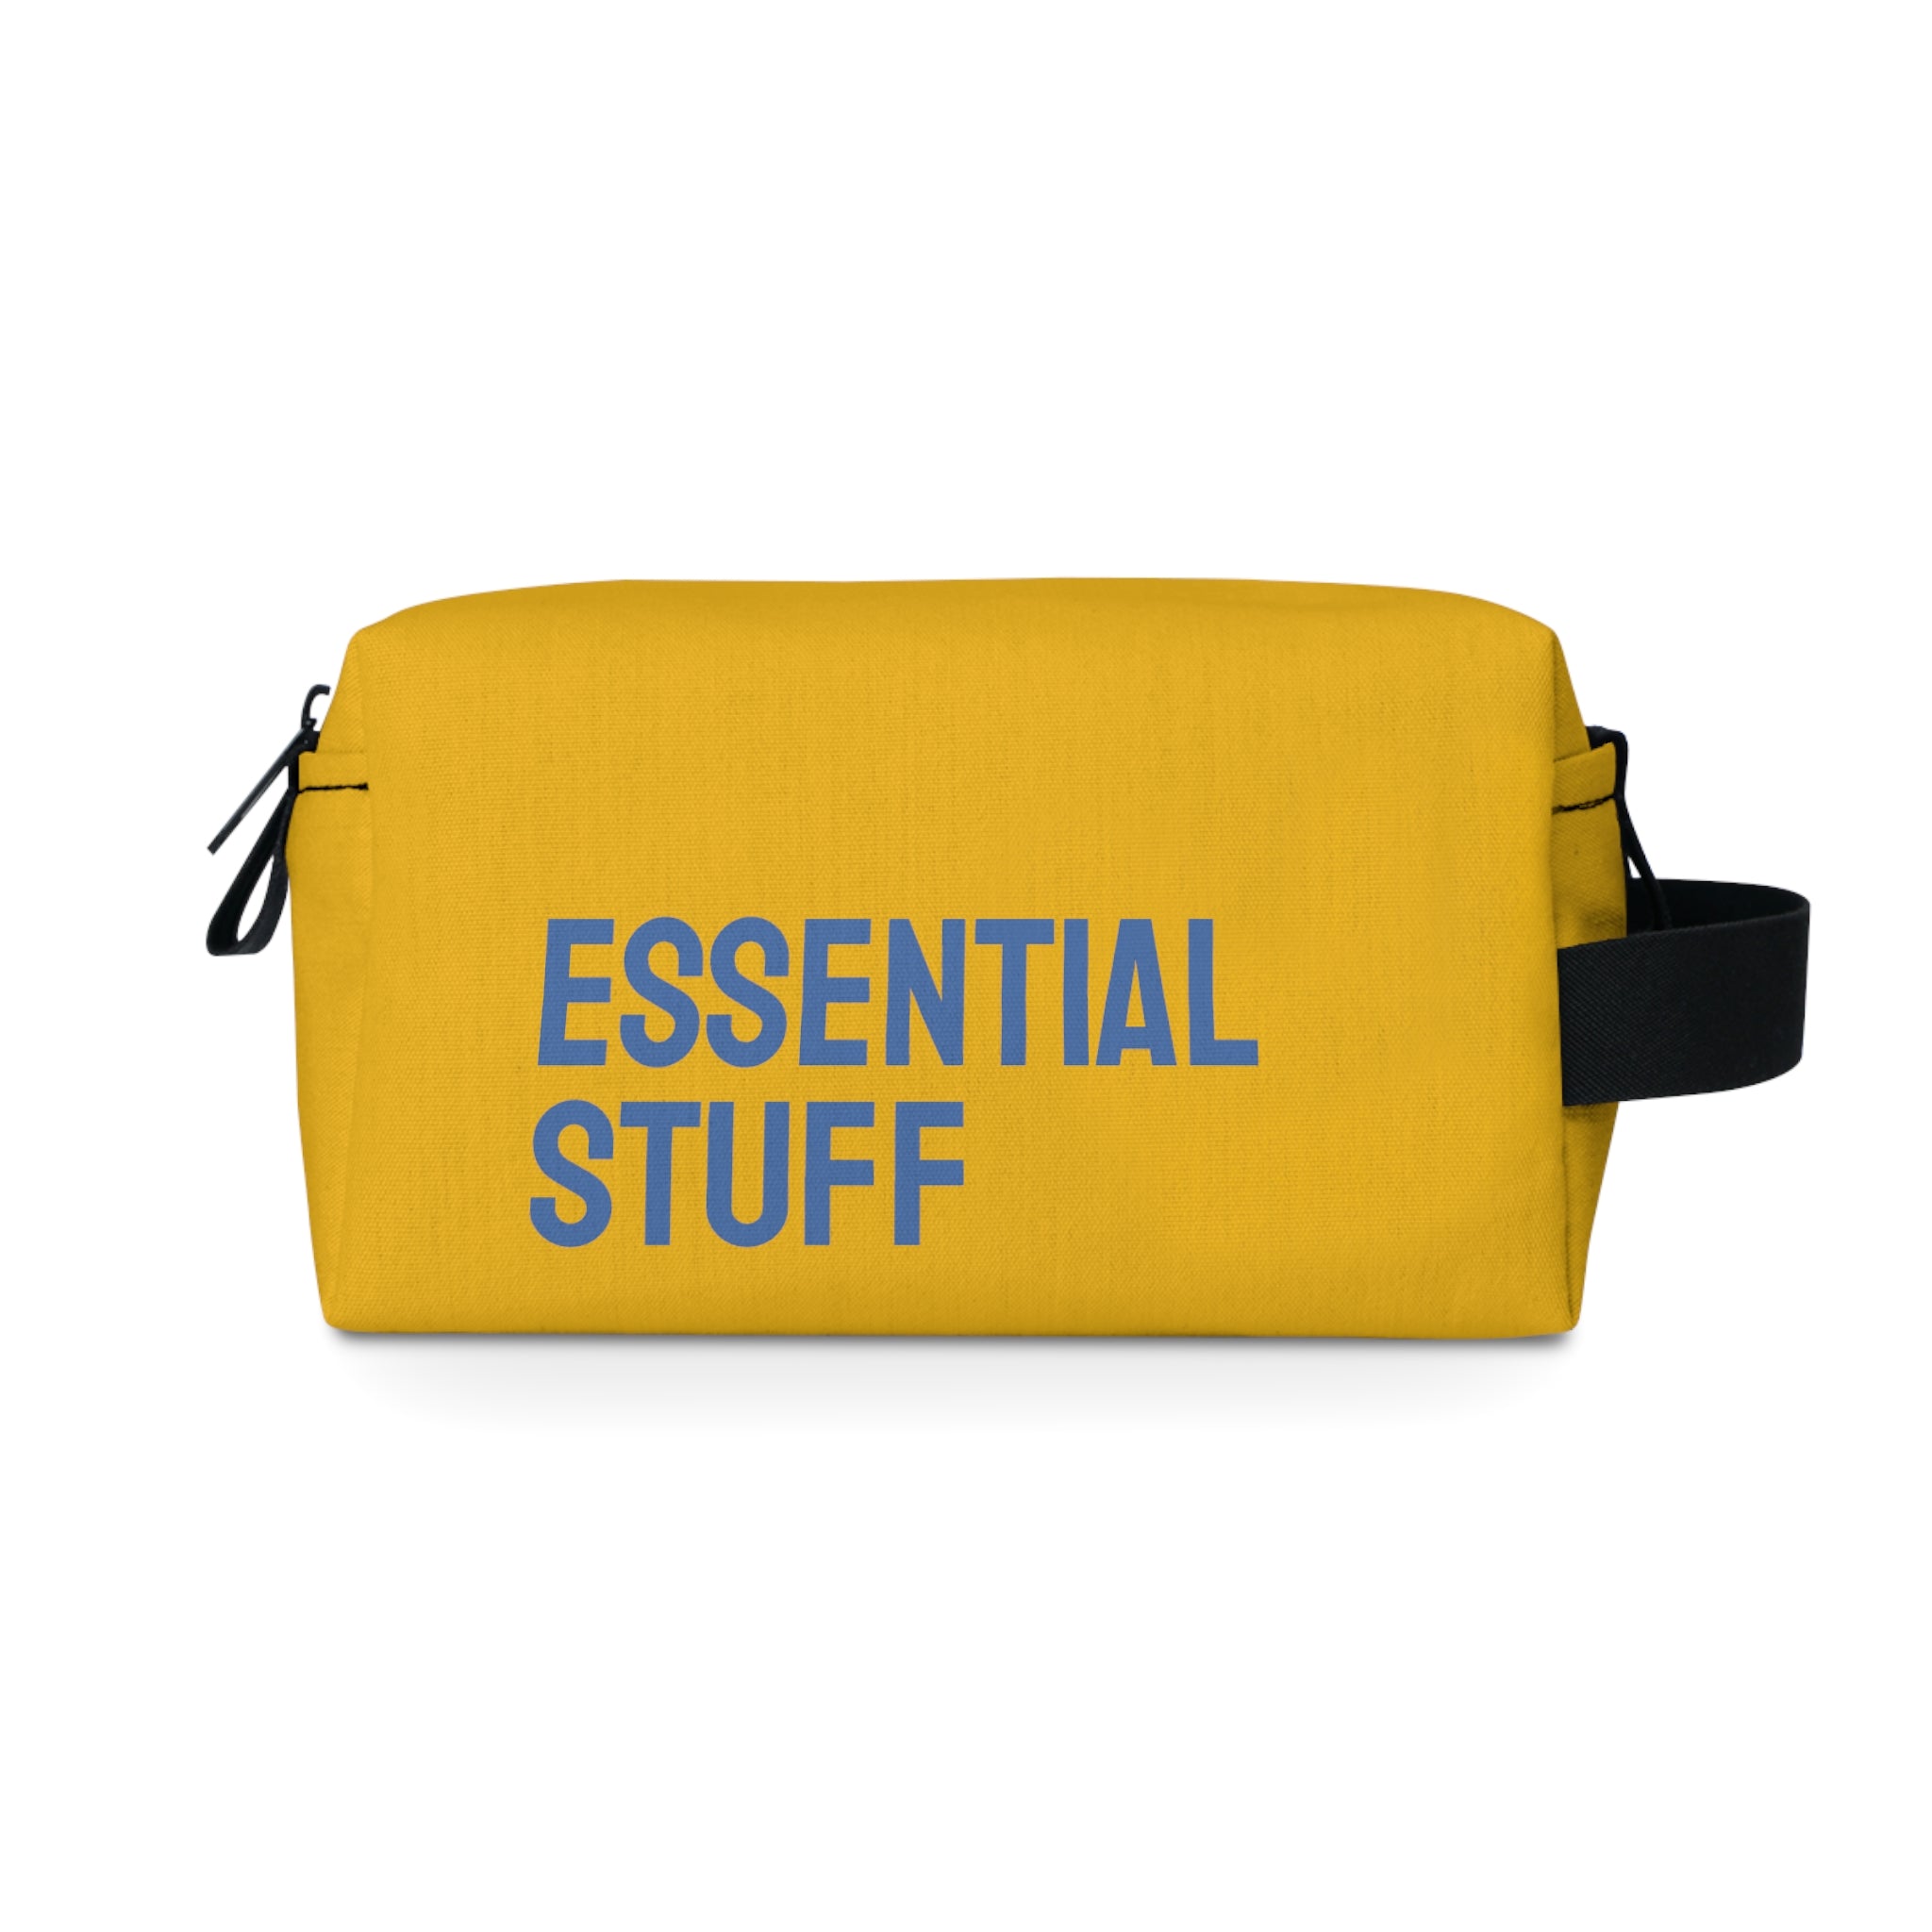 Essential stuff Toiletry Pouch (Yellow)